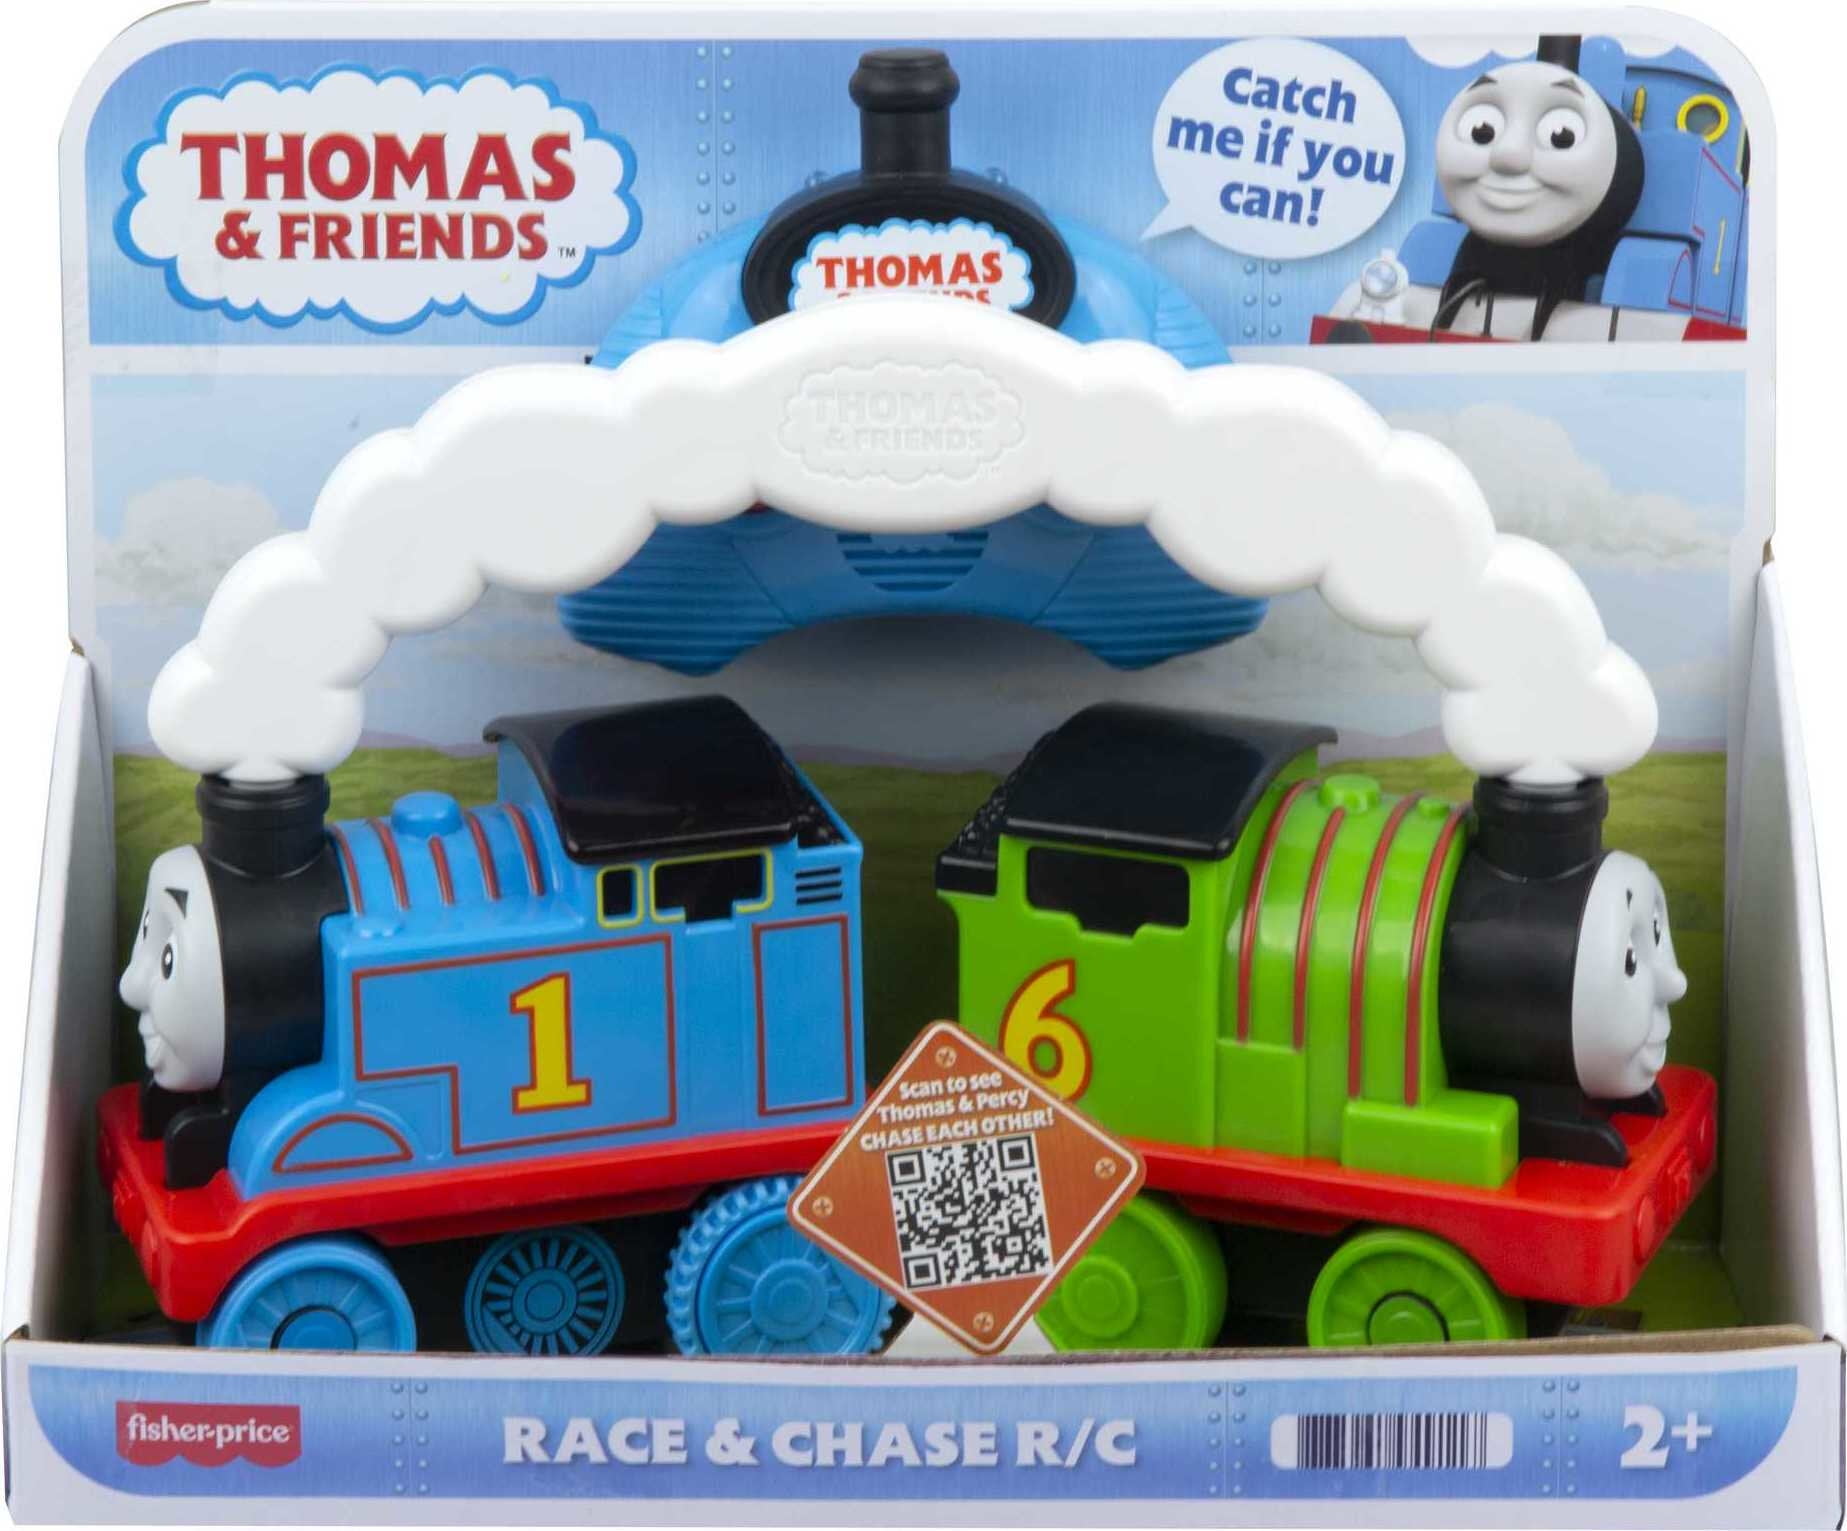 Kids Toys Play Thomas and Friends Races